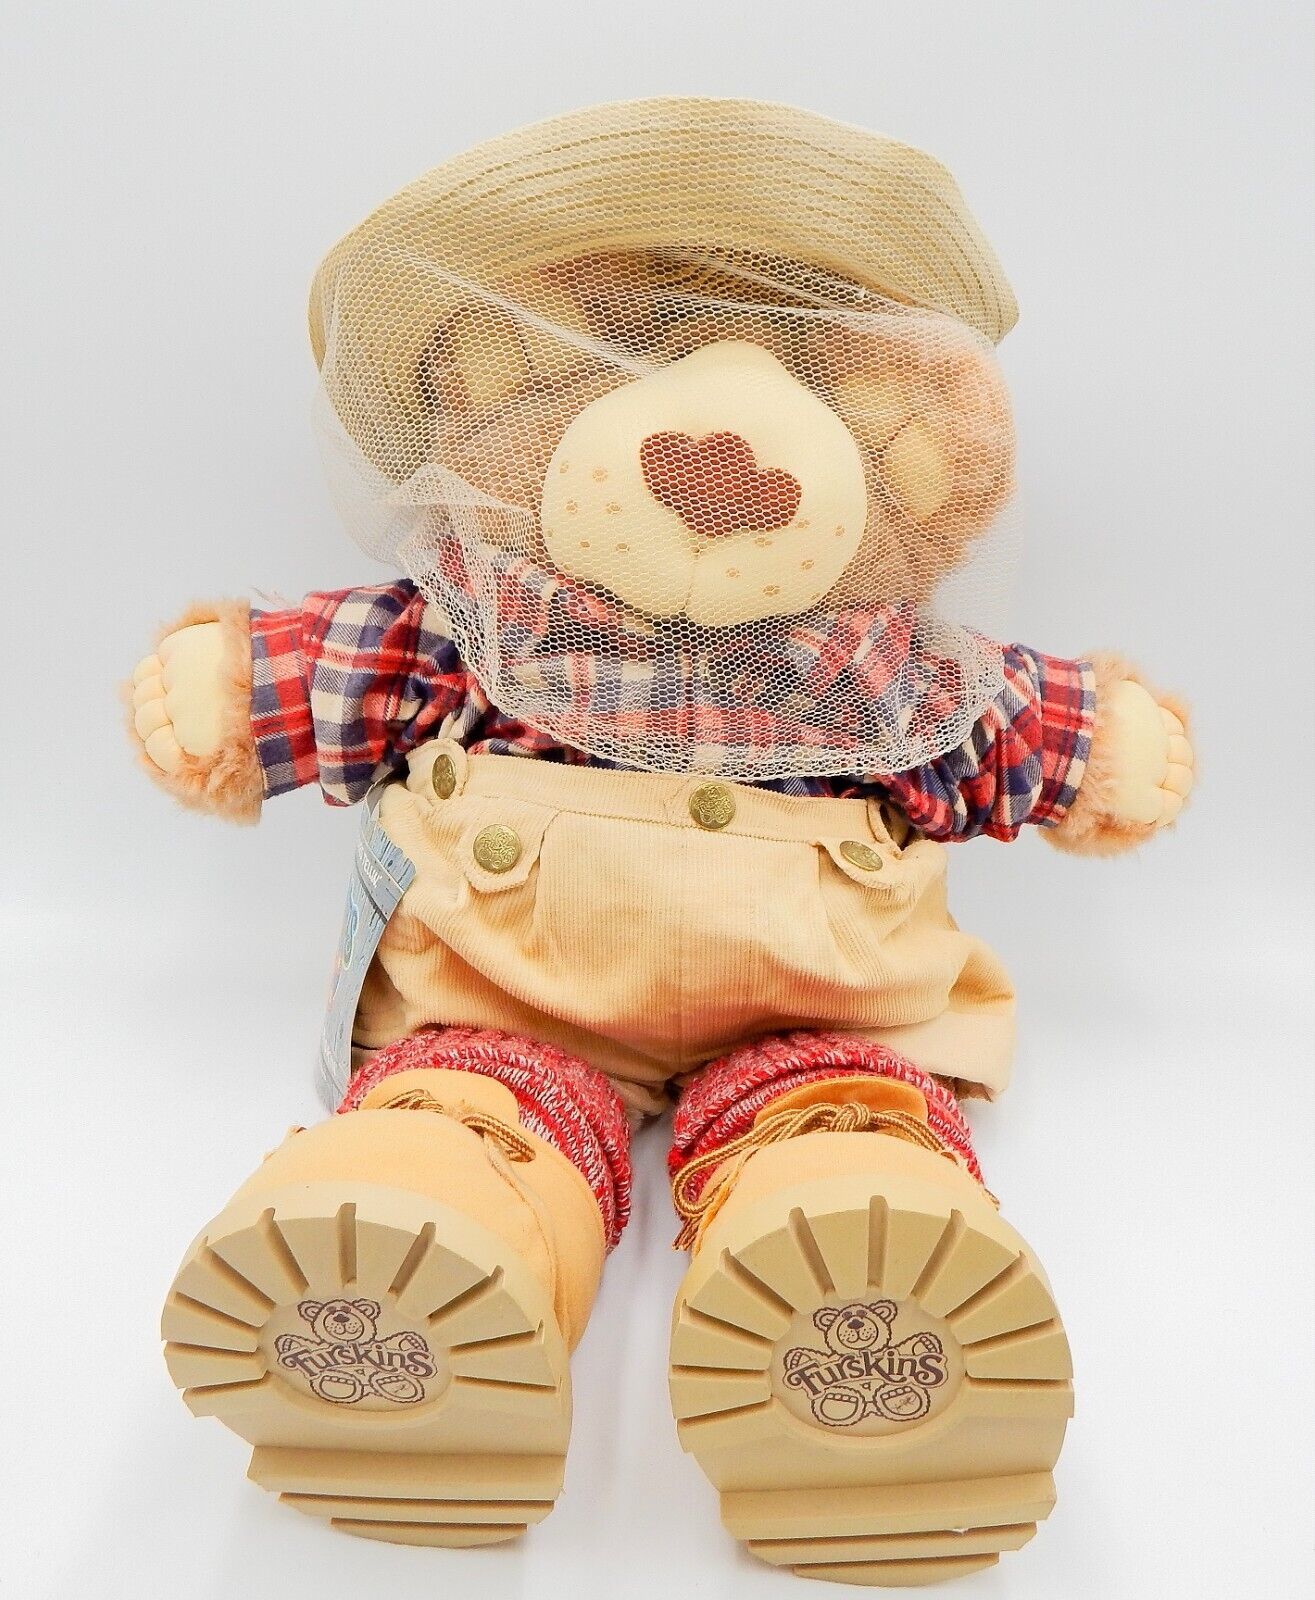 Furskins Xavier Roberts 1986 Boone FurSkin Bear Stuffed Animal With Tag Coleco - $59.99